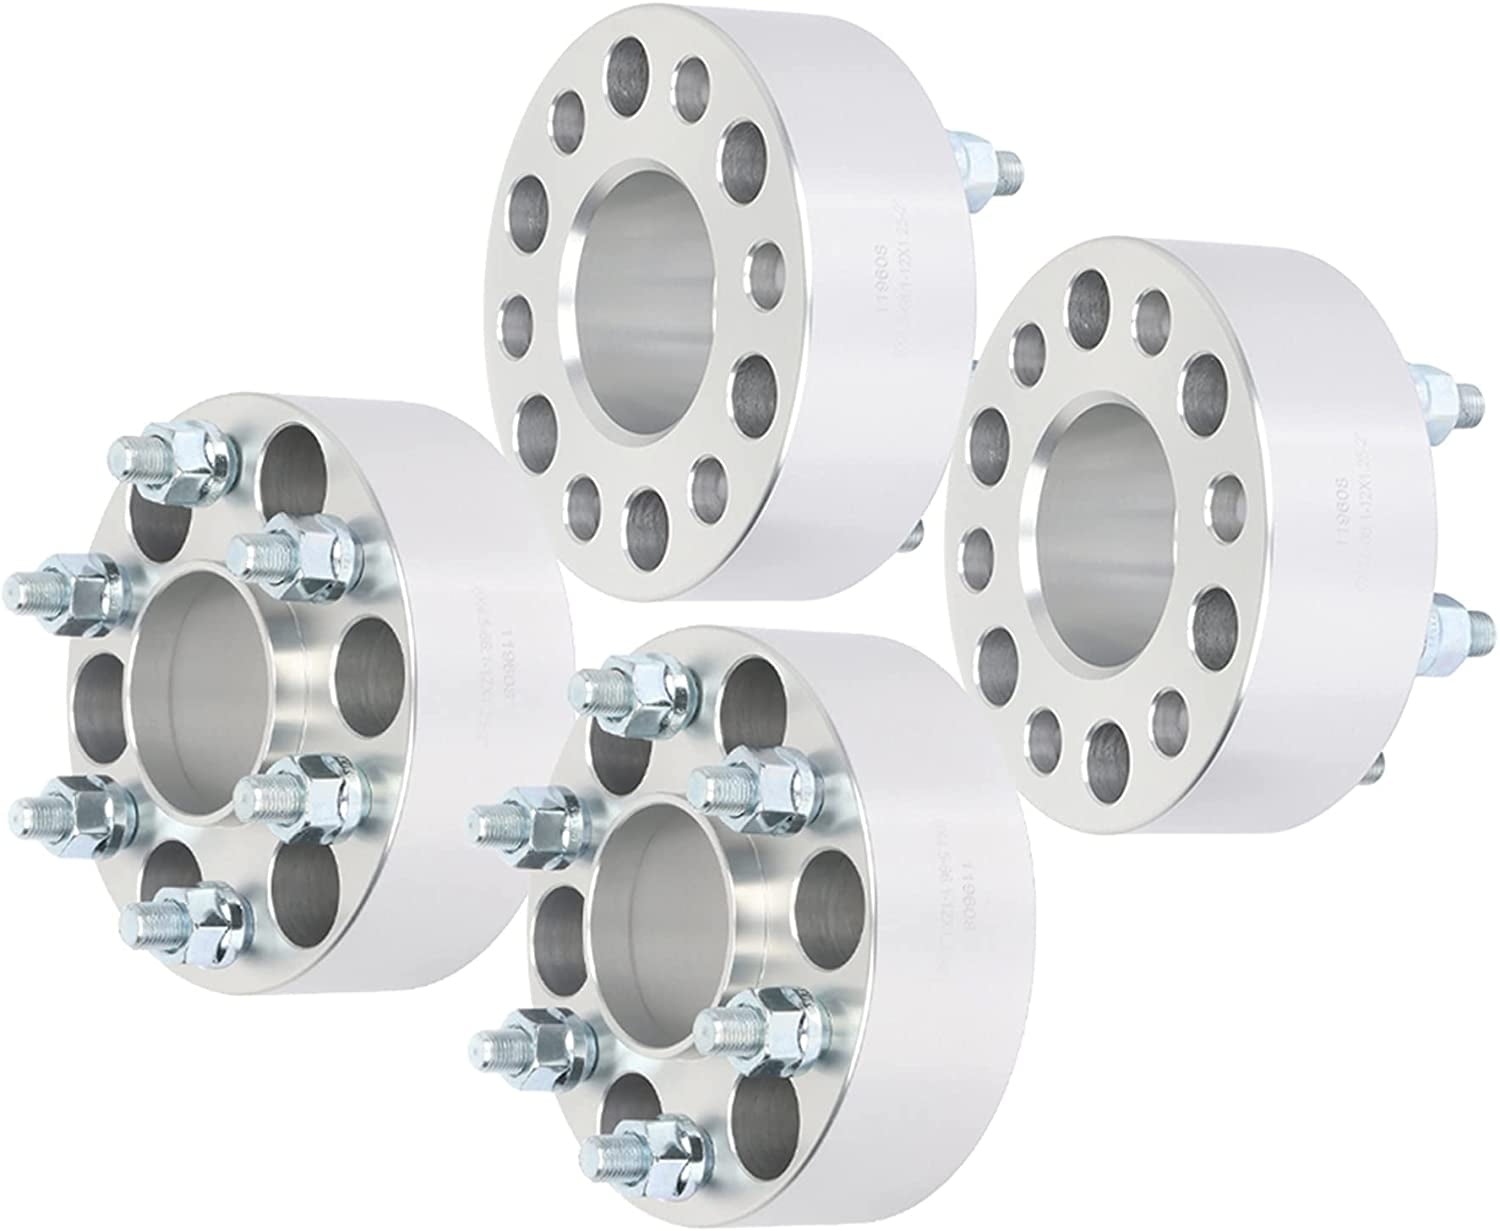 SCITOO 2x 5x4.5 12x1.5 82.5 2 Wheel Spacers 5x114.3mm fits for 2011-2015 Chevrolet Volt 1993-1997 for F-ord Probe 